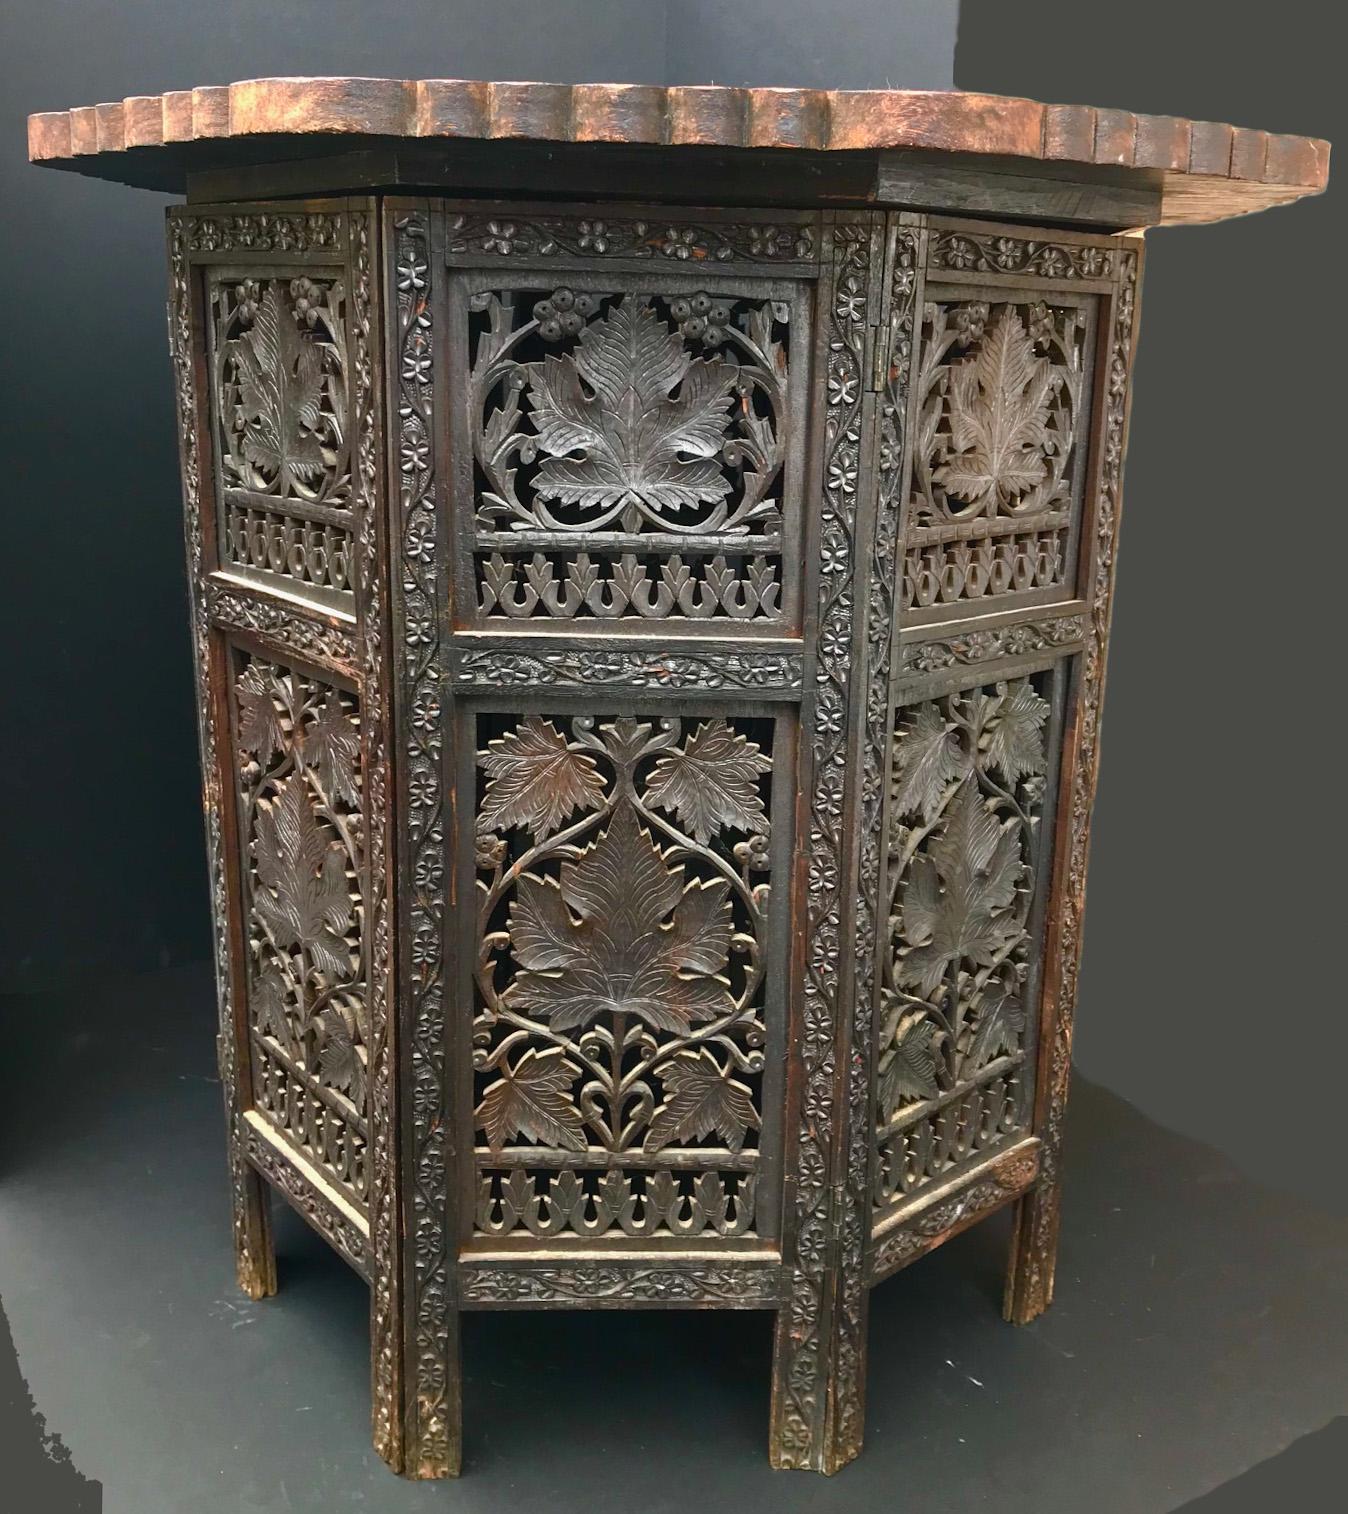 This octagon hardwood Tabouret is intricately carved with grape vine leaves. The top is highly decorated with a carved design and the center is inlaid with brass ornaments. The top is removable and the hinged base can be folded flat. This side table